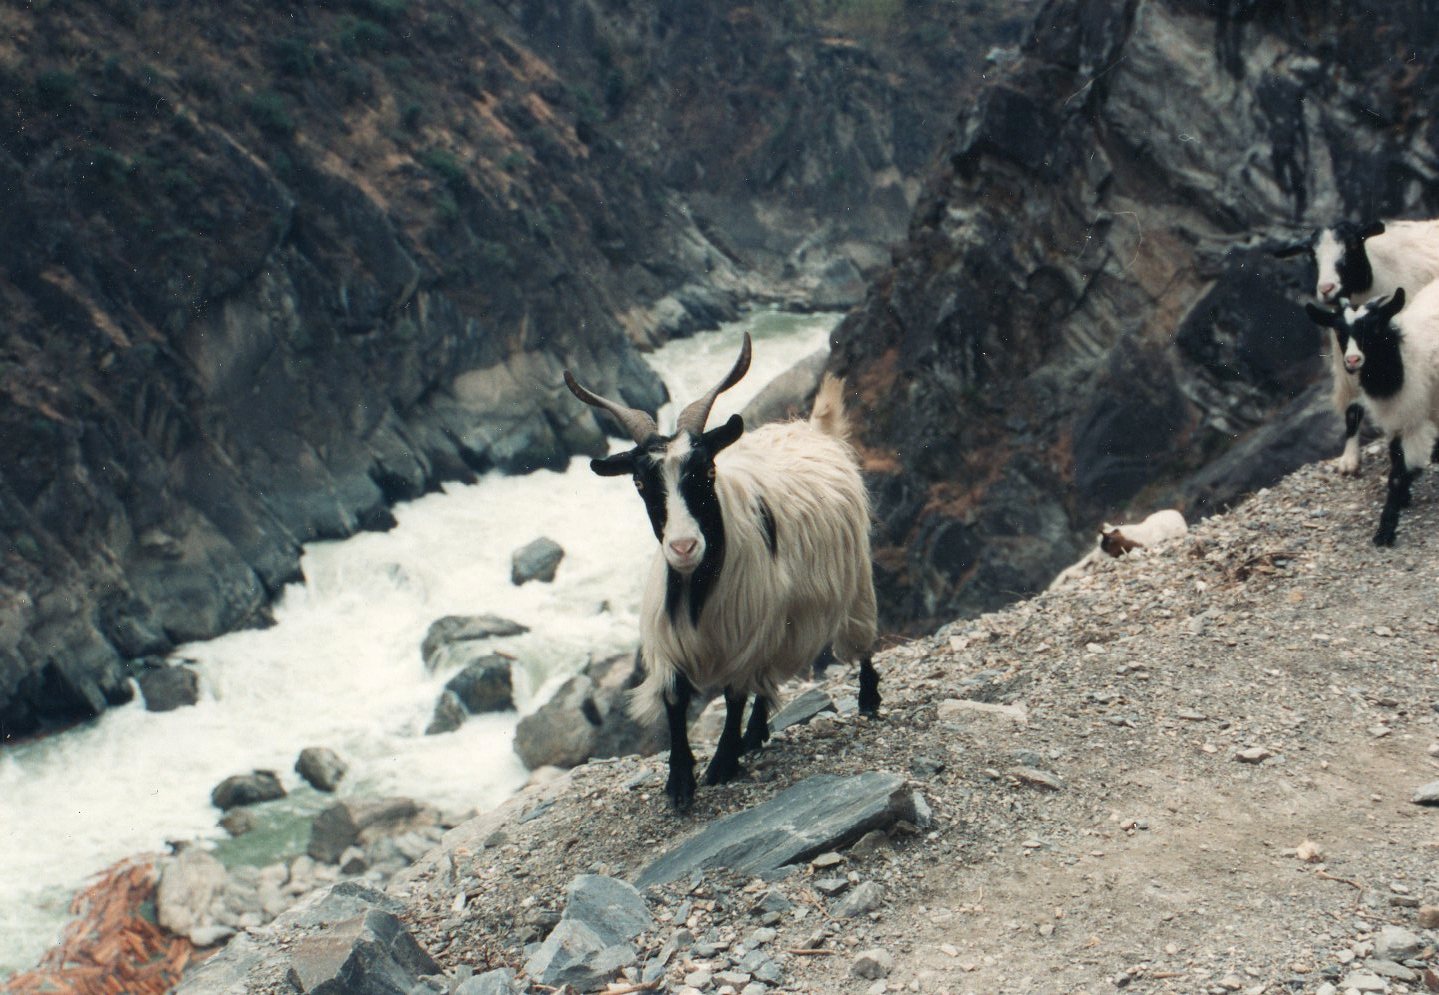 Tiger Leaping Gorge: Tiger Leaping Gorge - © William Mackesy